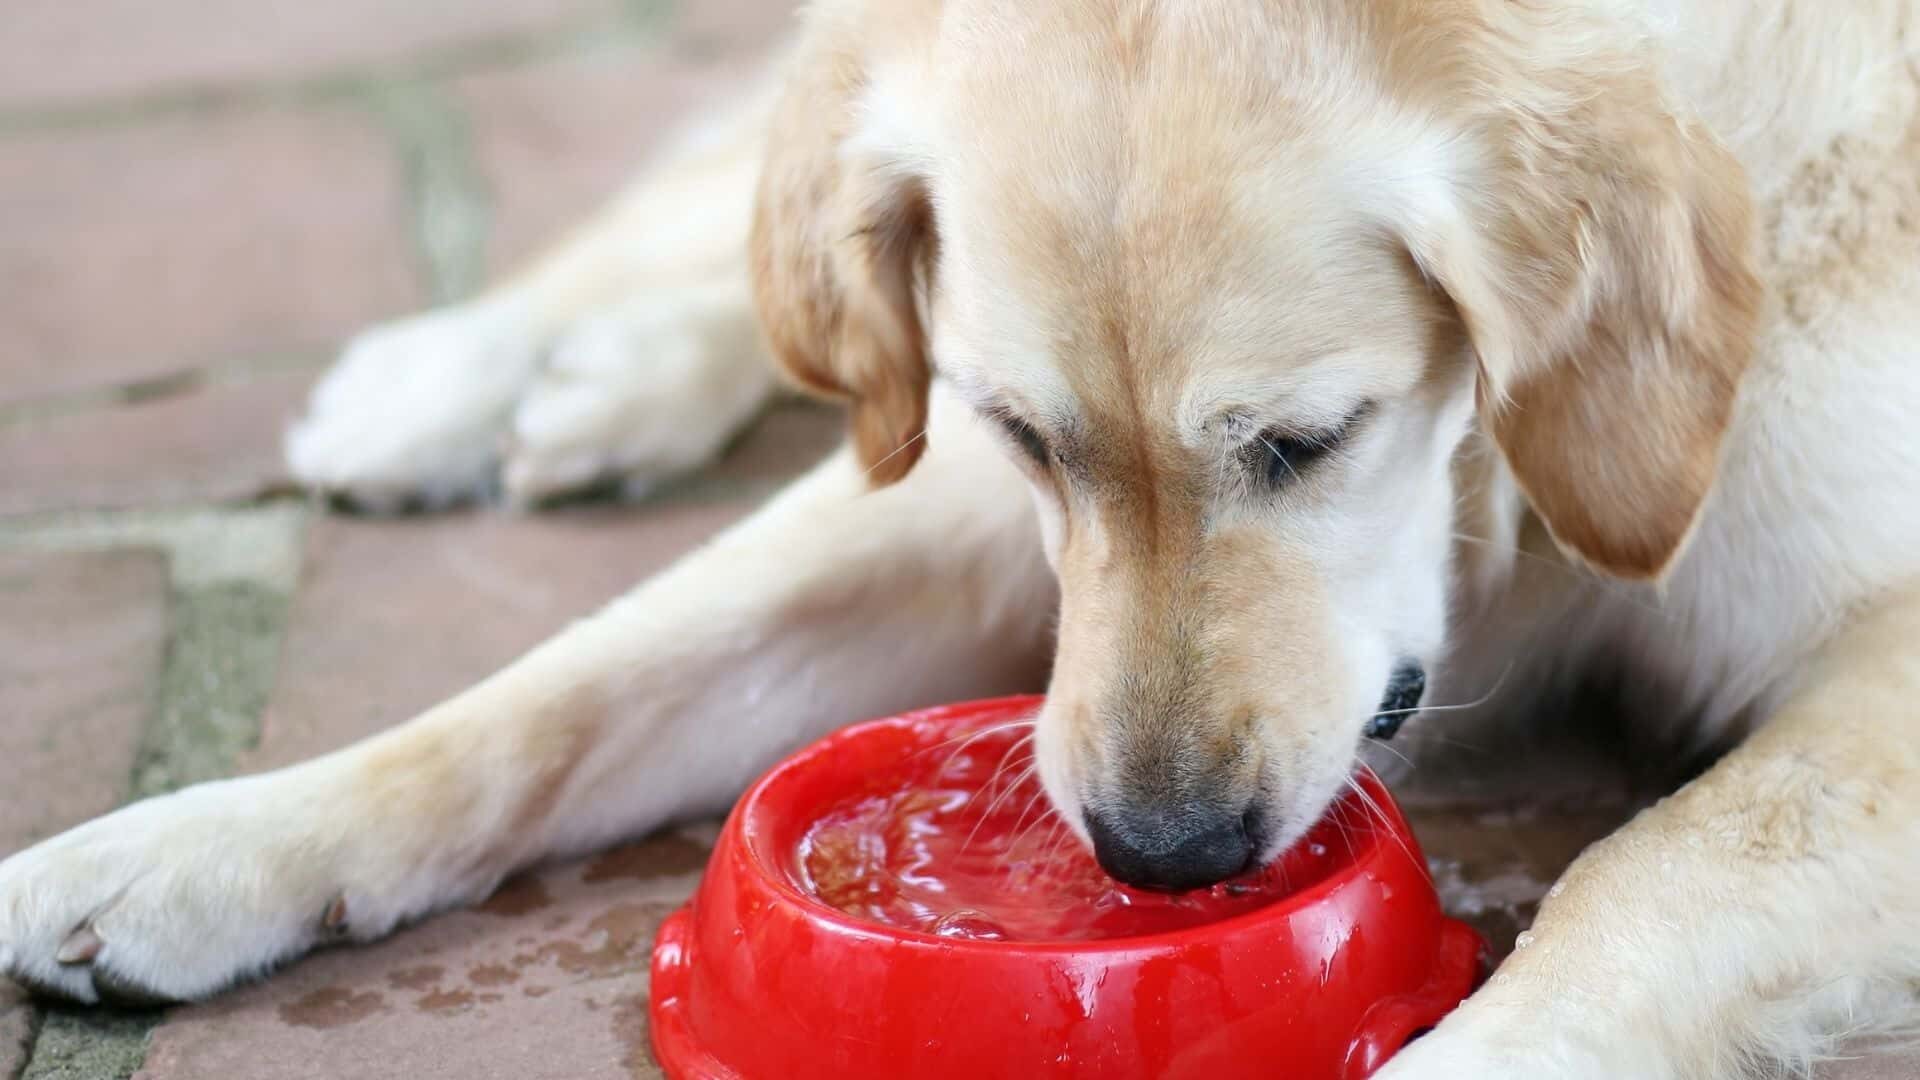 How to make your dog drink water slower?